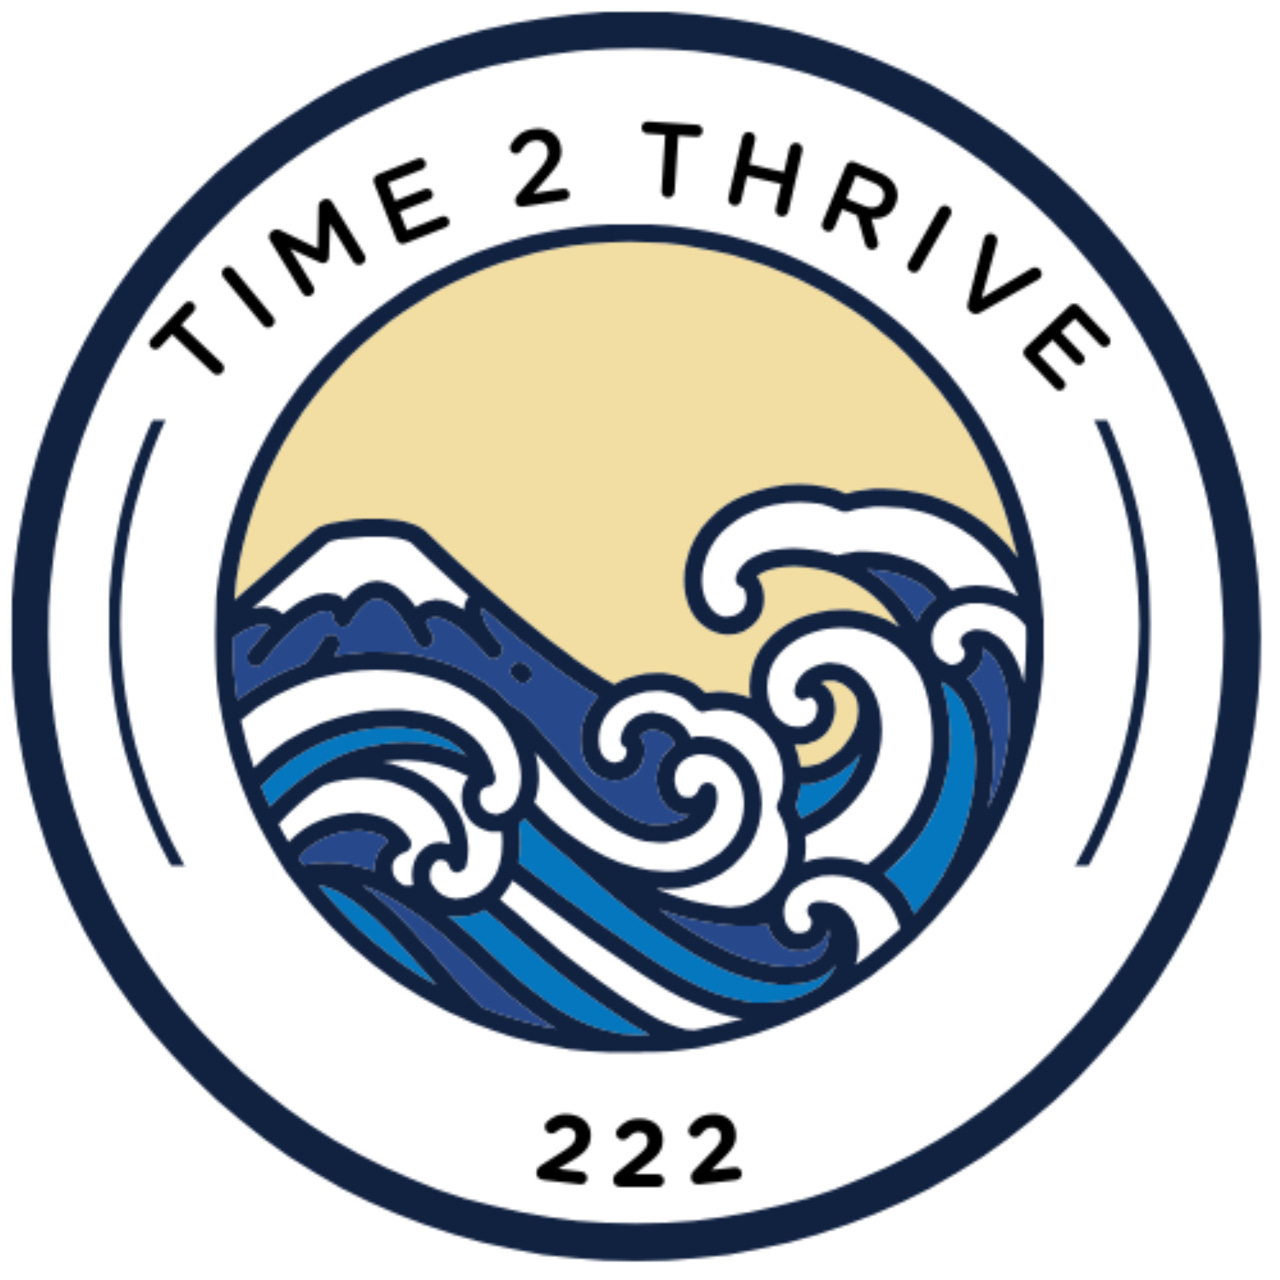 Time2Thrive